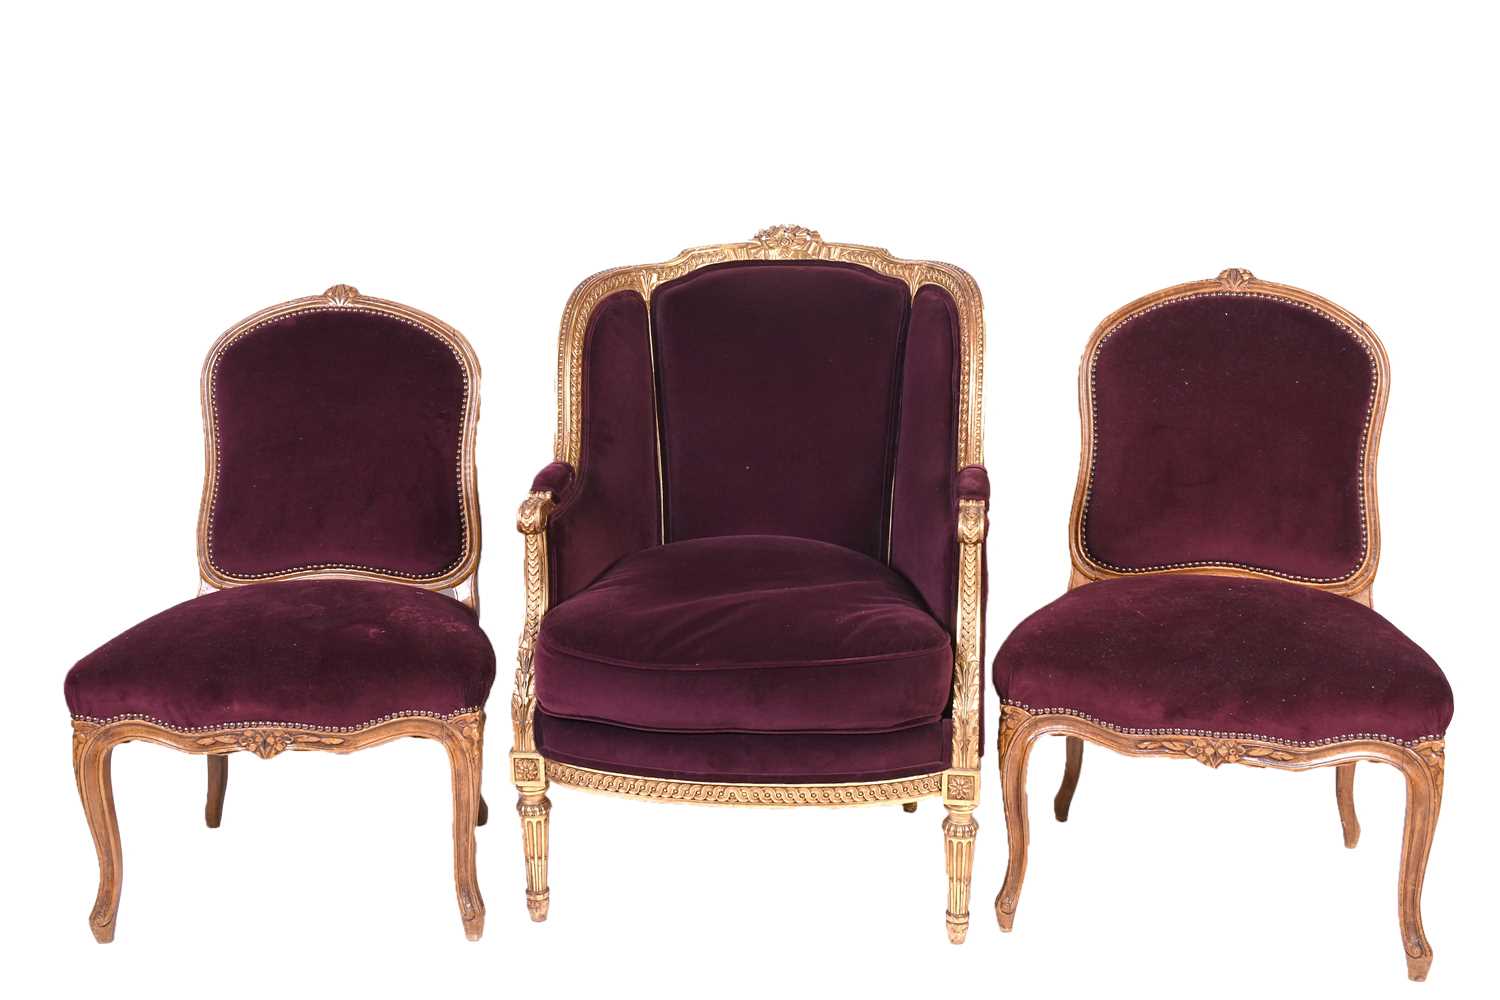 A French carved, gilded and upholstered armchair, late 19th/early 20th century, together with two